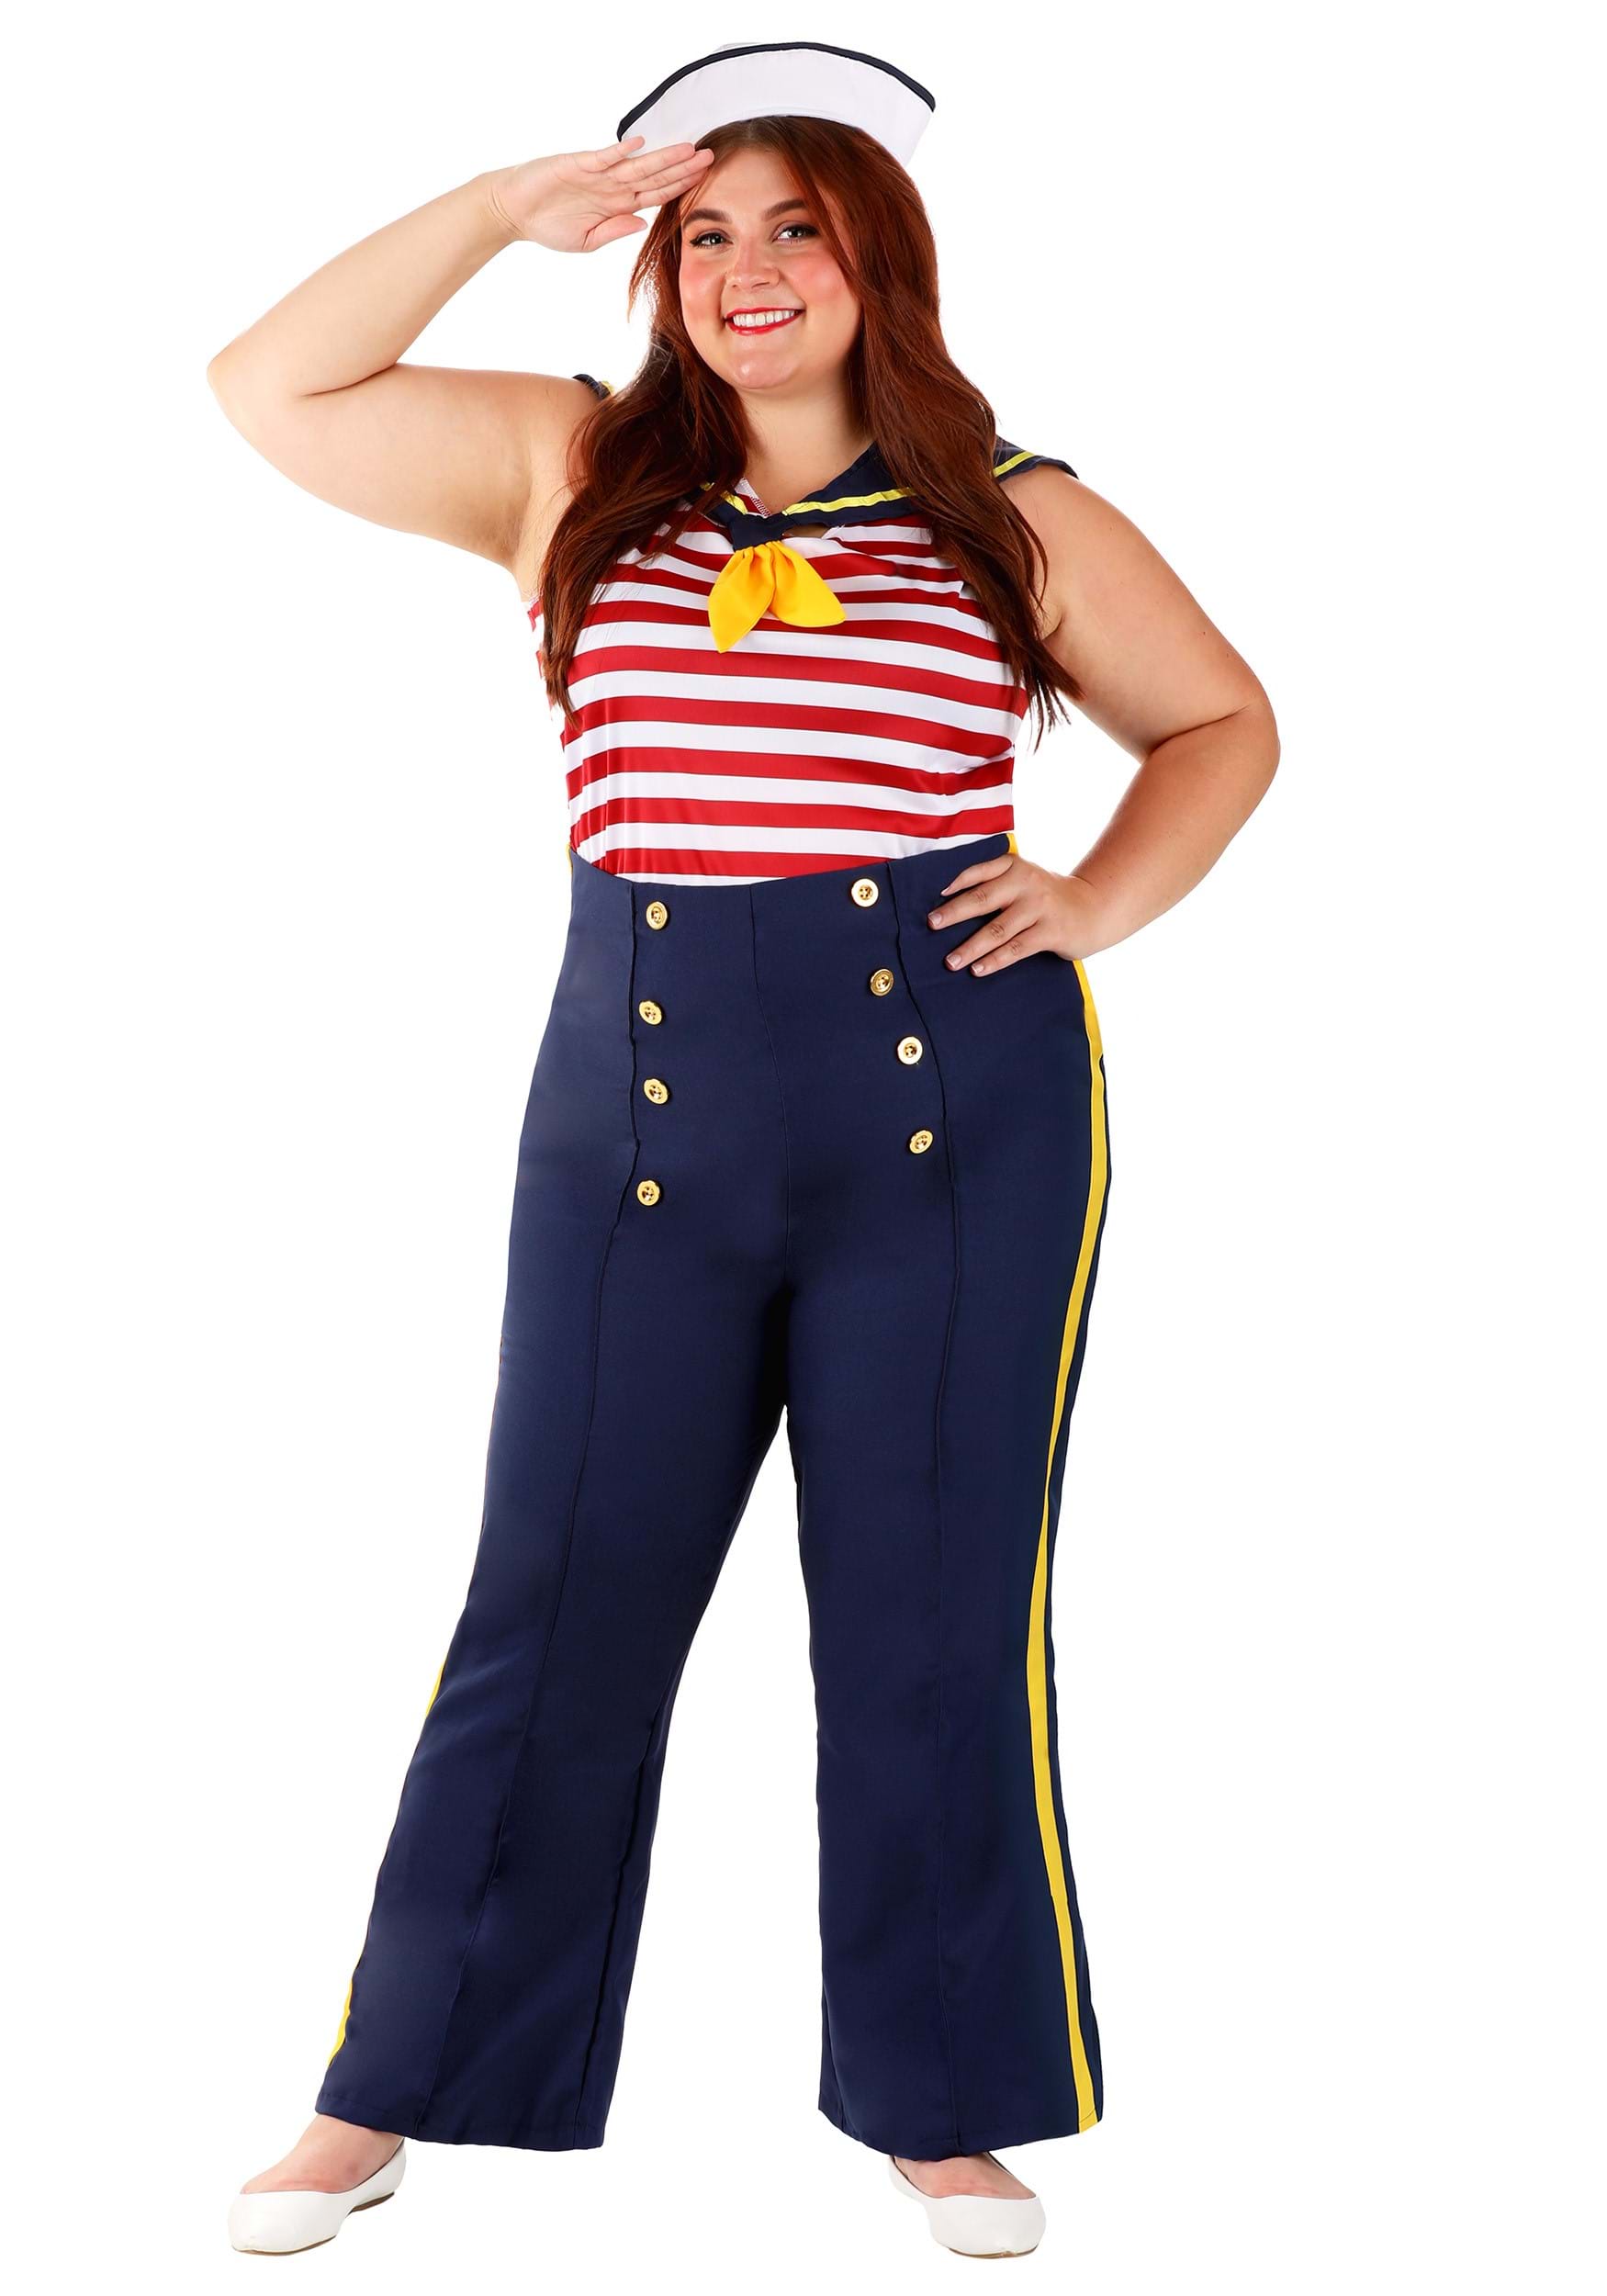 Perfect Pin Up Sailor Costume For Plus Size Women 1X 2X